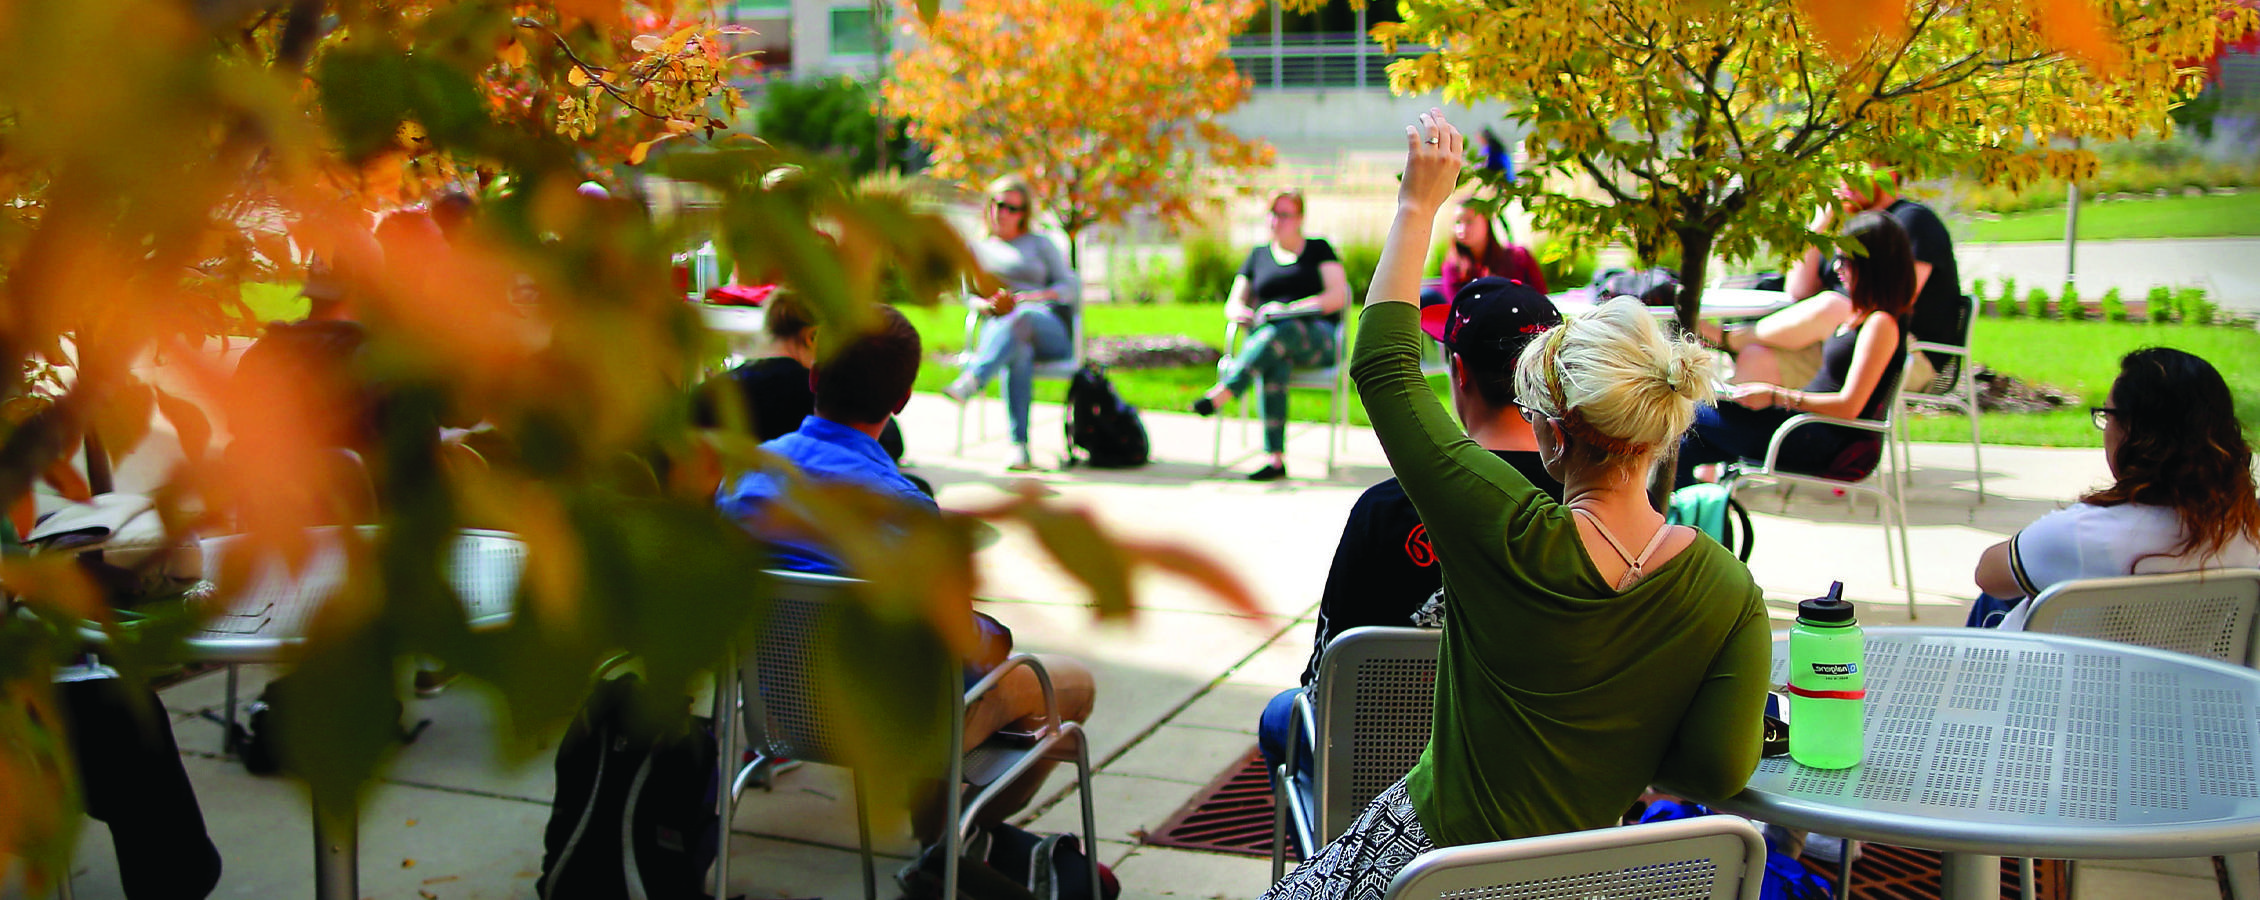 A class is held outside amidst fall leaves.